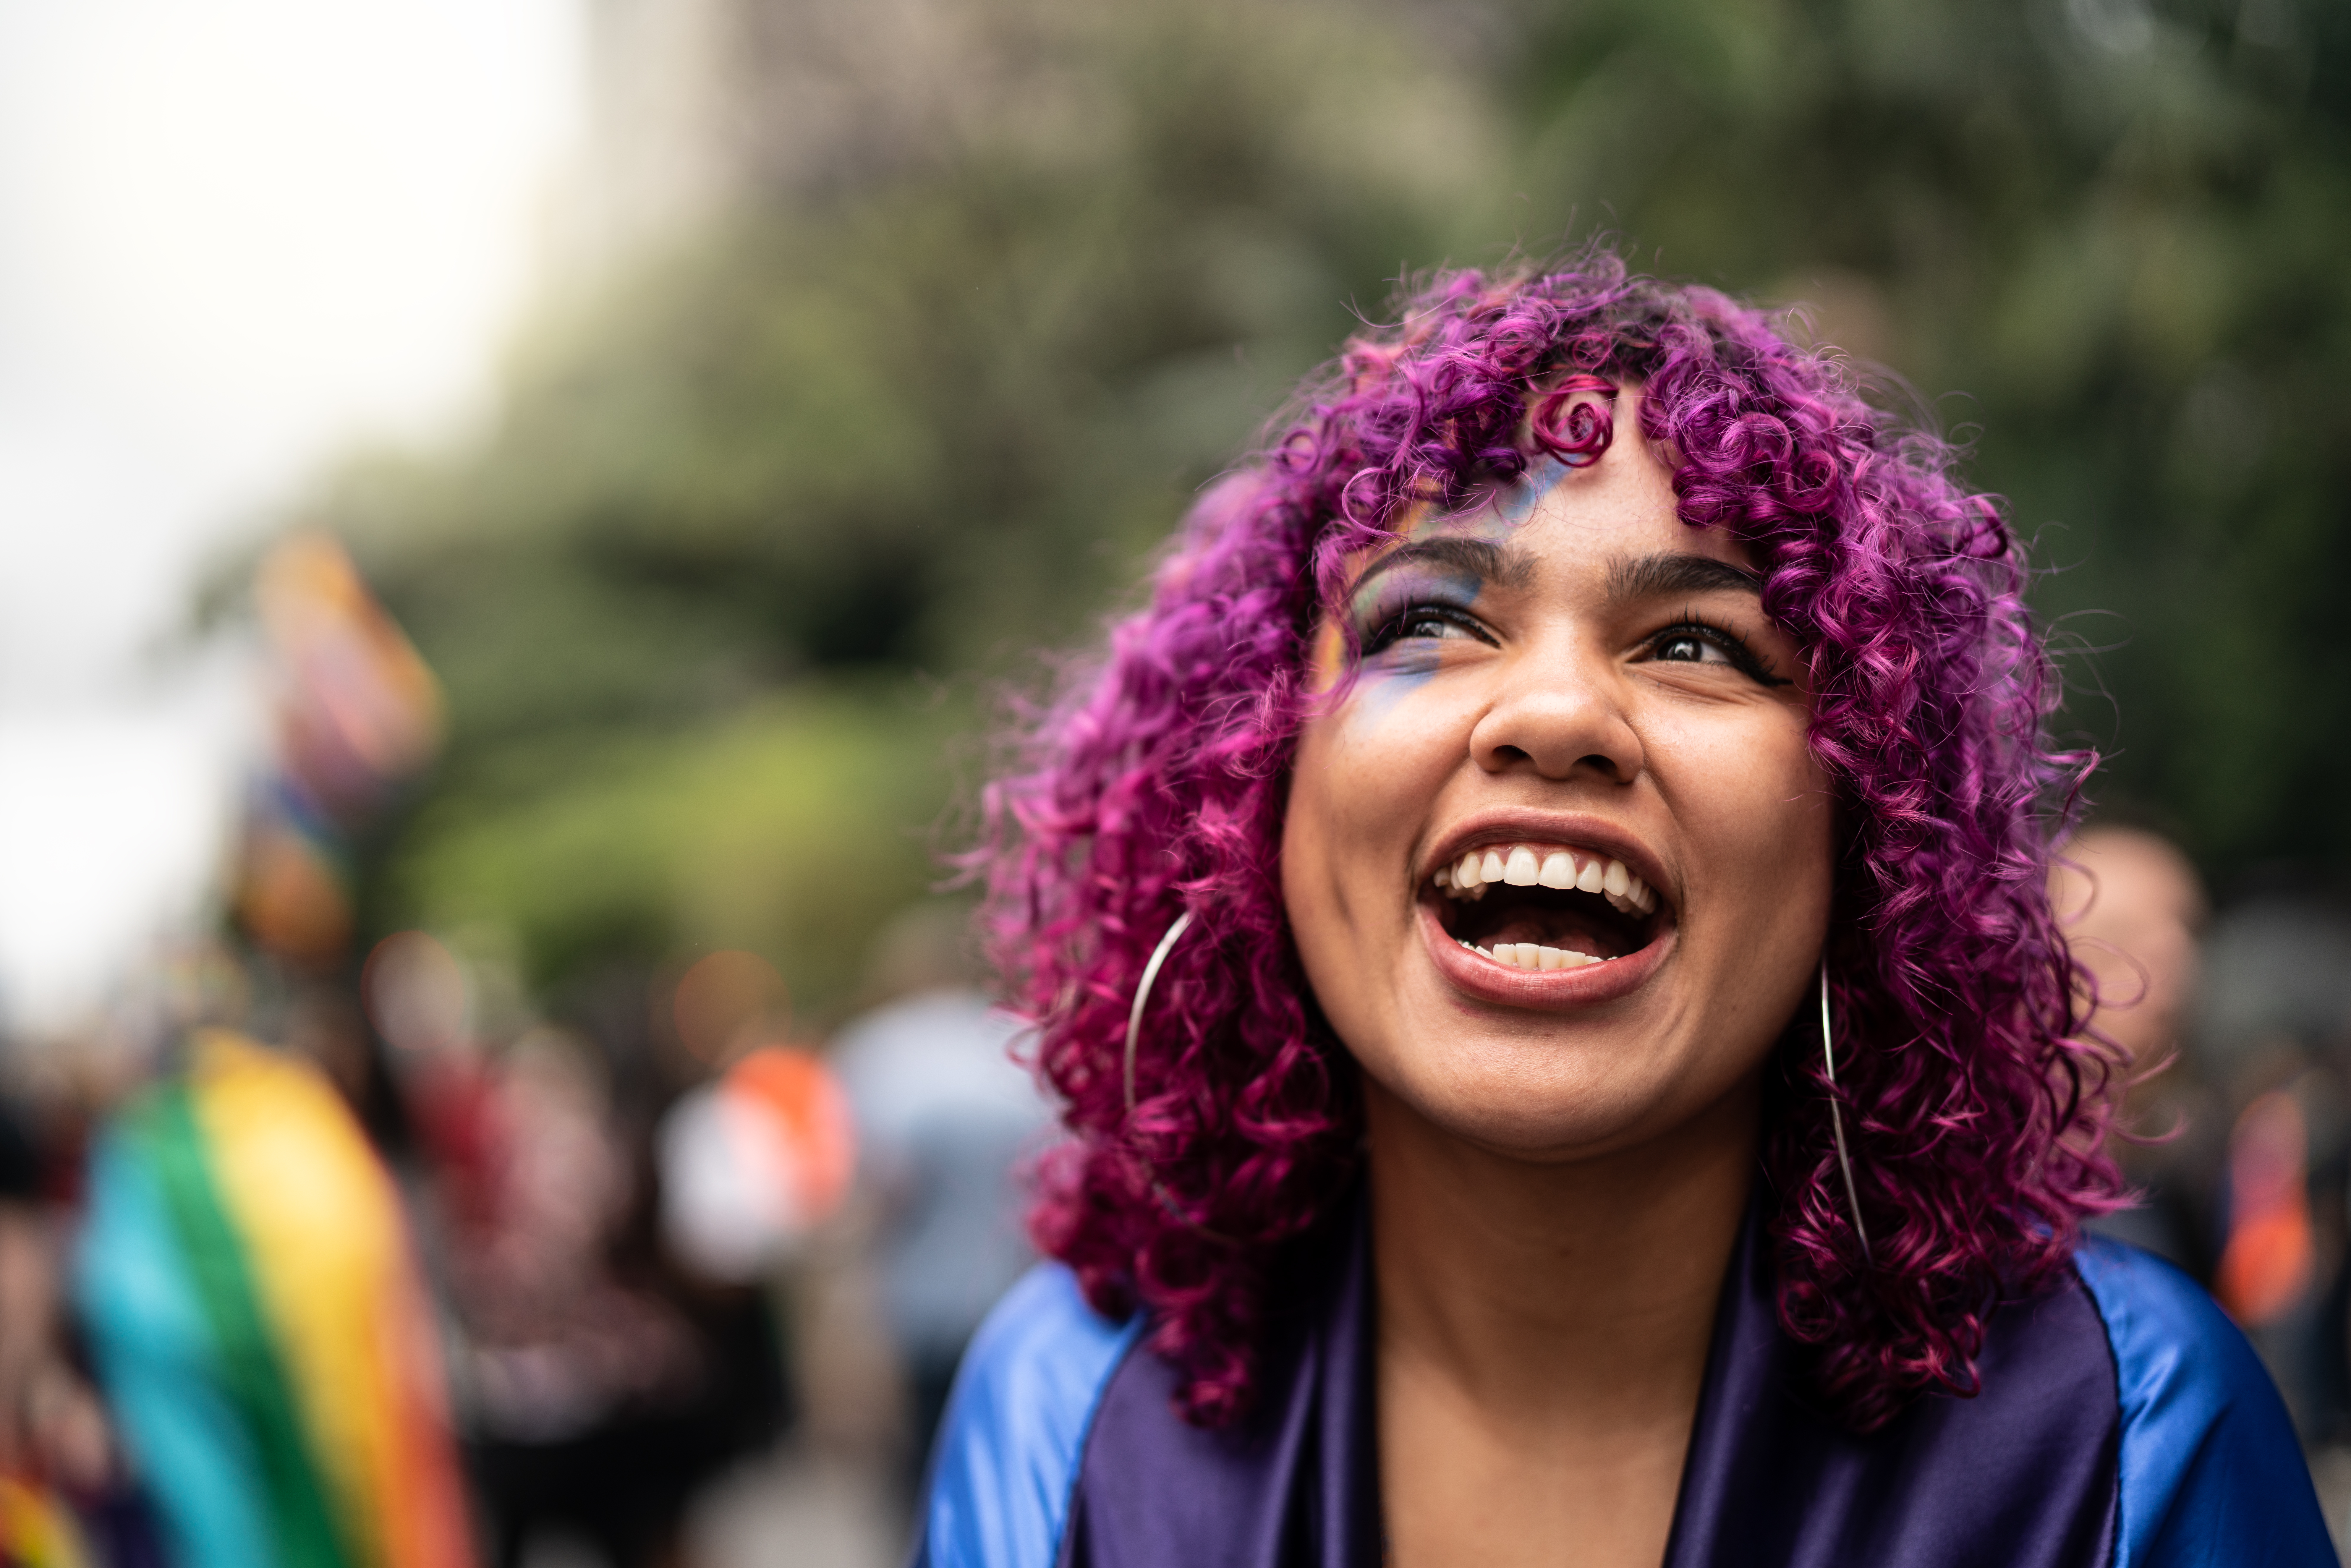 A young woman of color with curly purple hair and a painted face smiles at pride parade